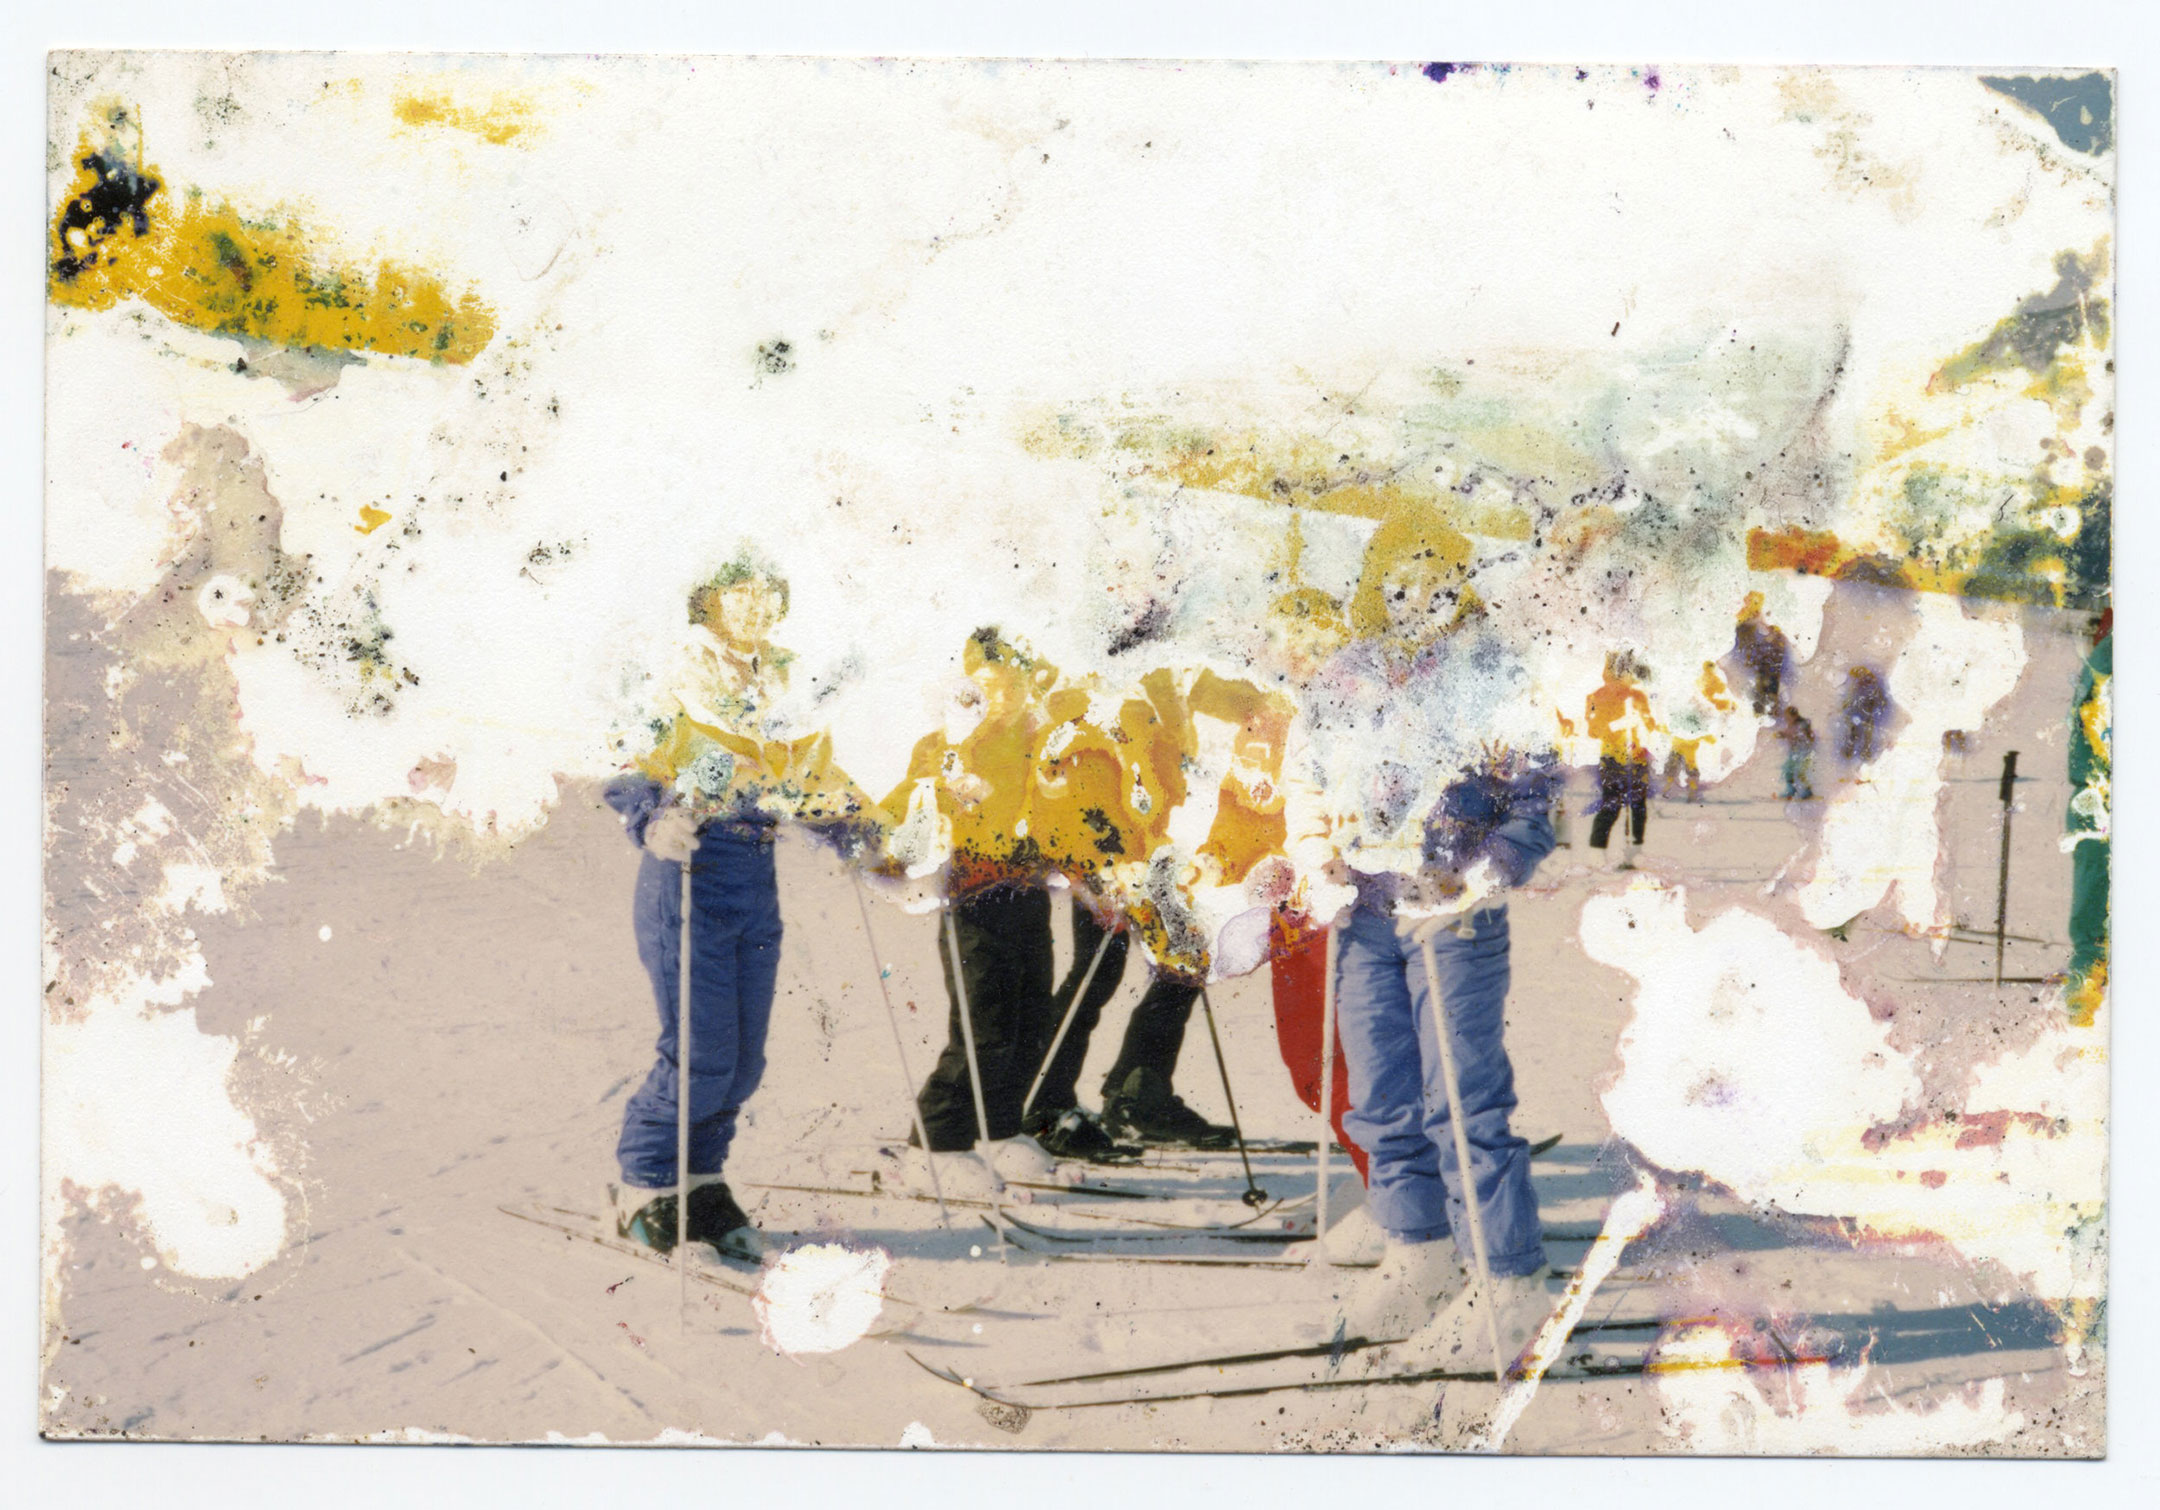 Photograph of five people skiing, but the top of the image is missing and bleached out